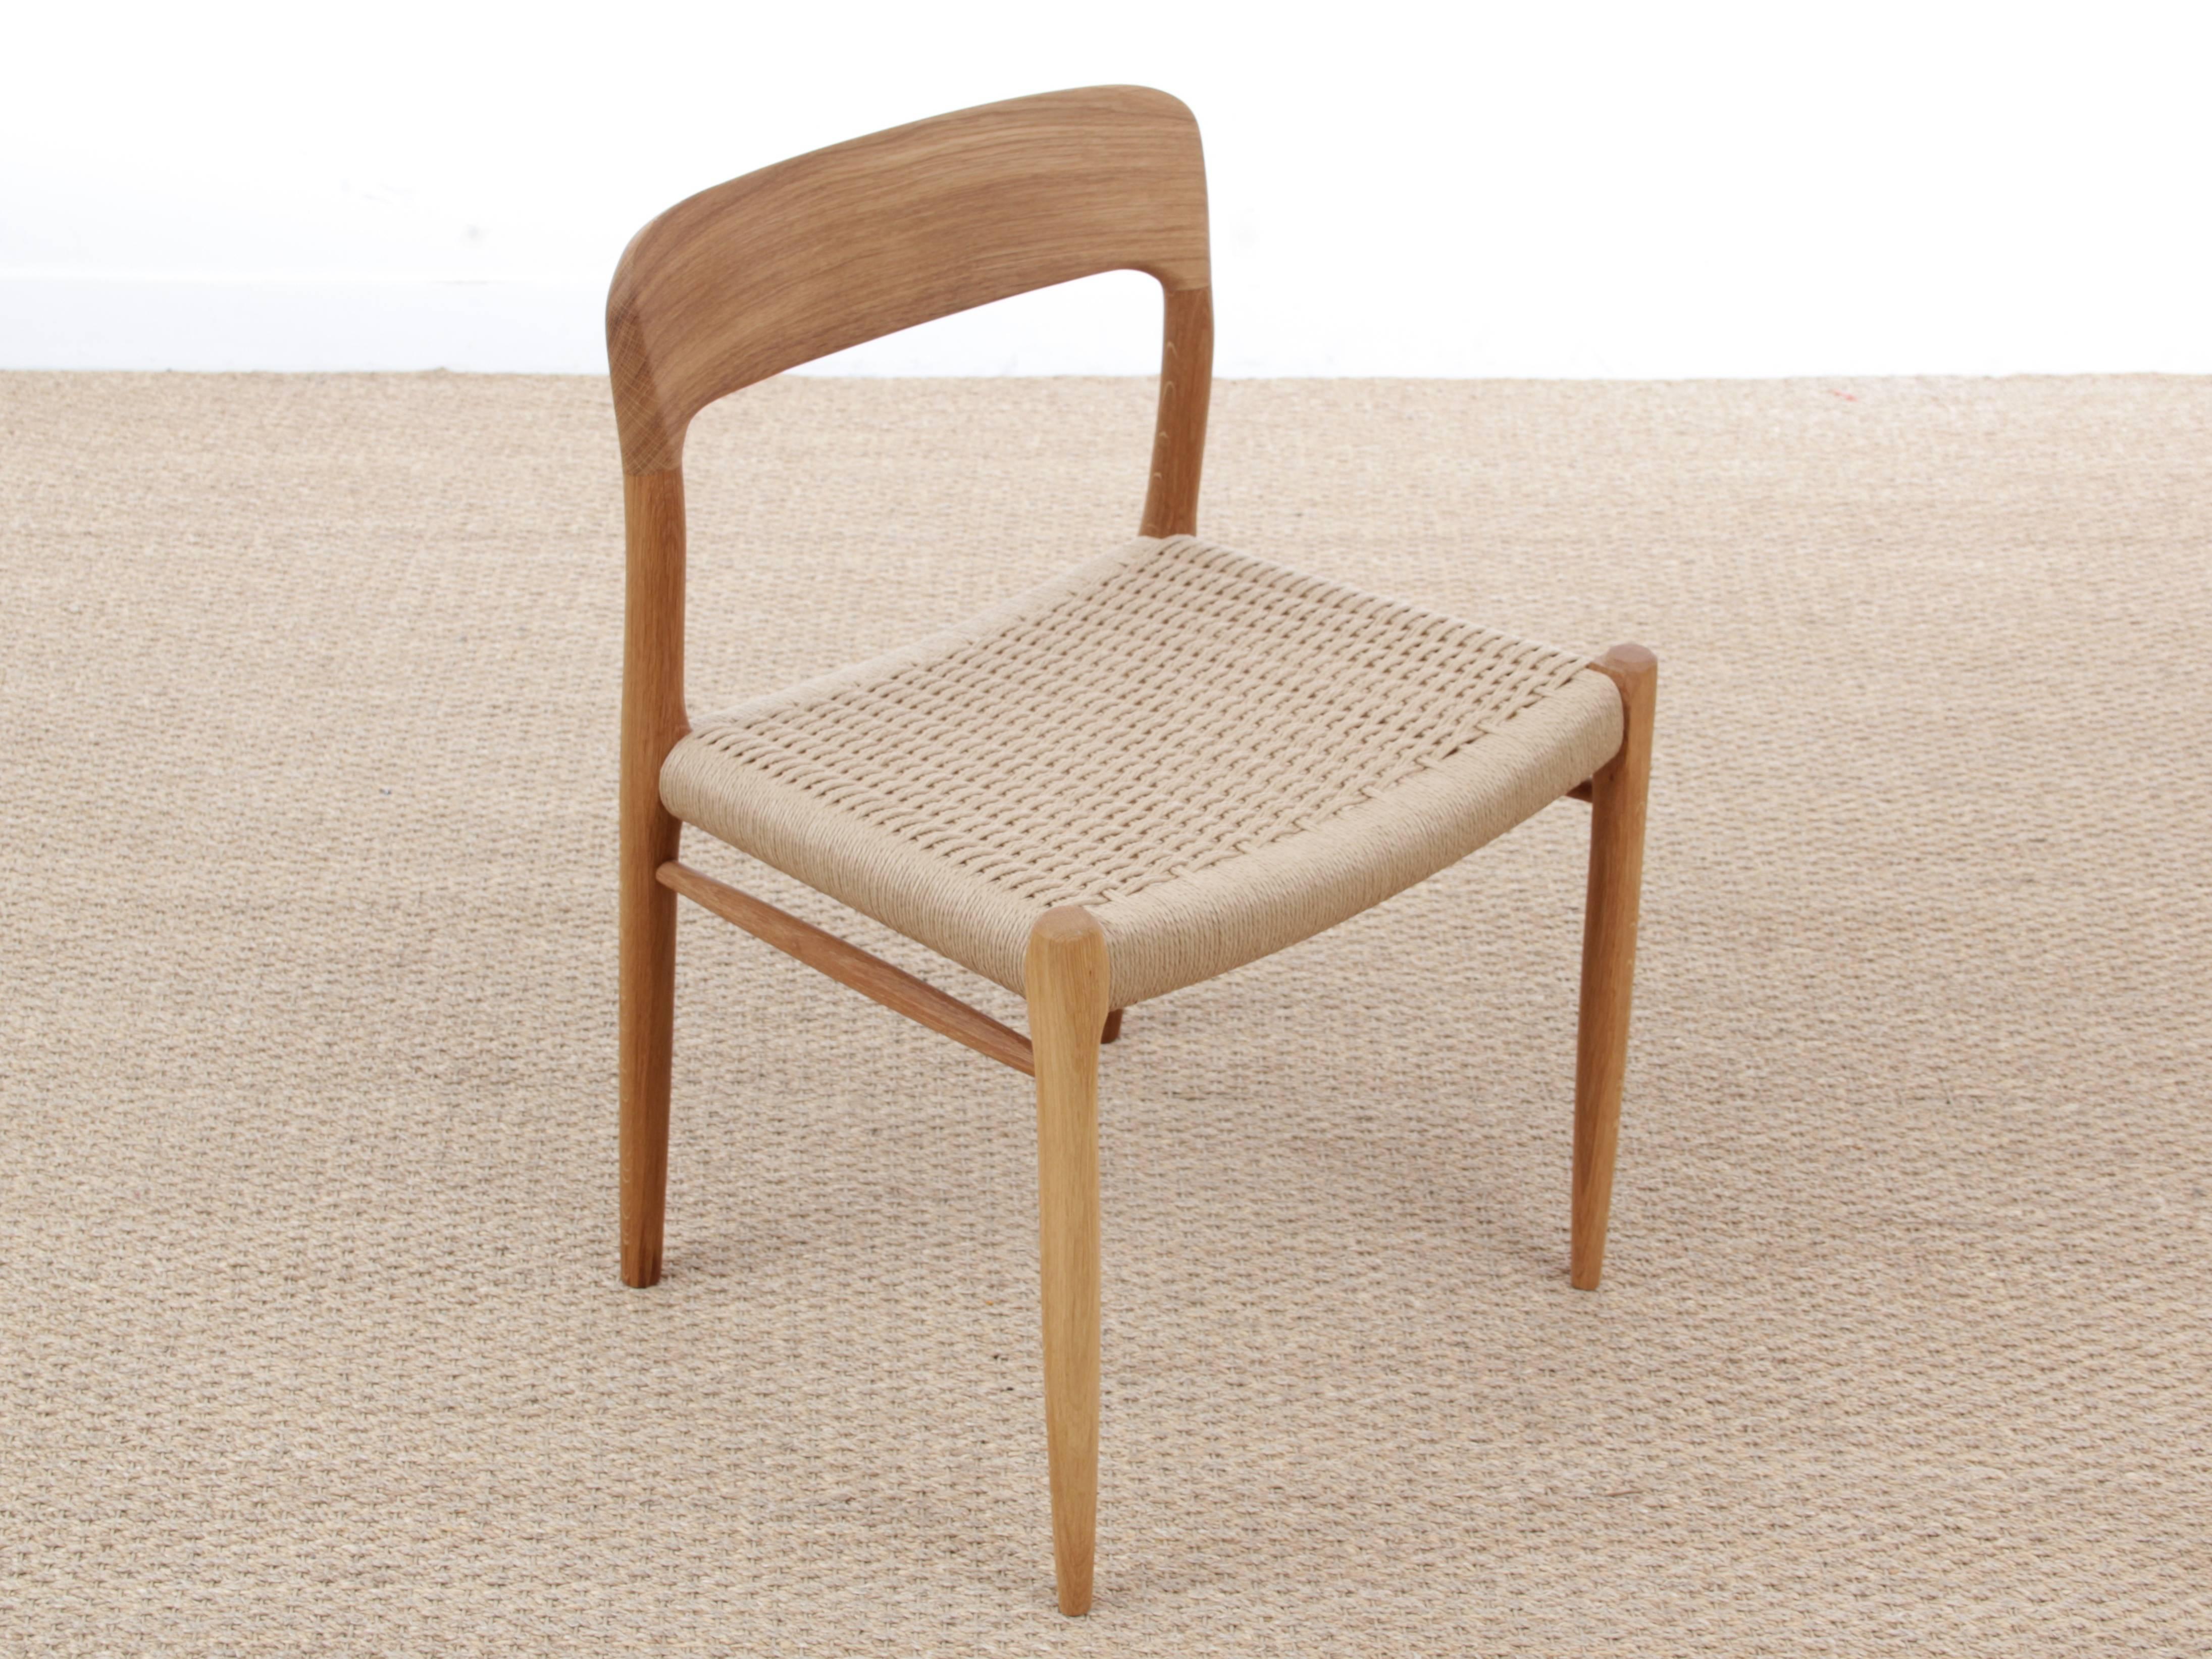 Contemporary Mid-Century Modern Danish Chair Model 75 by Niels O. Møller. New model For Sale